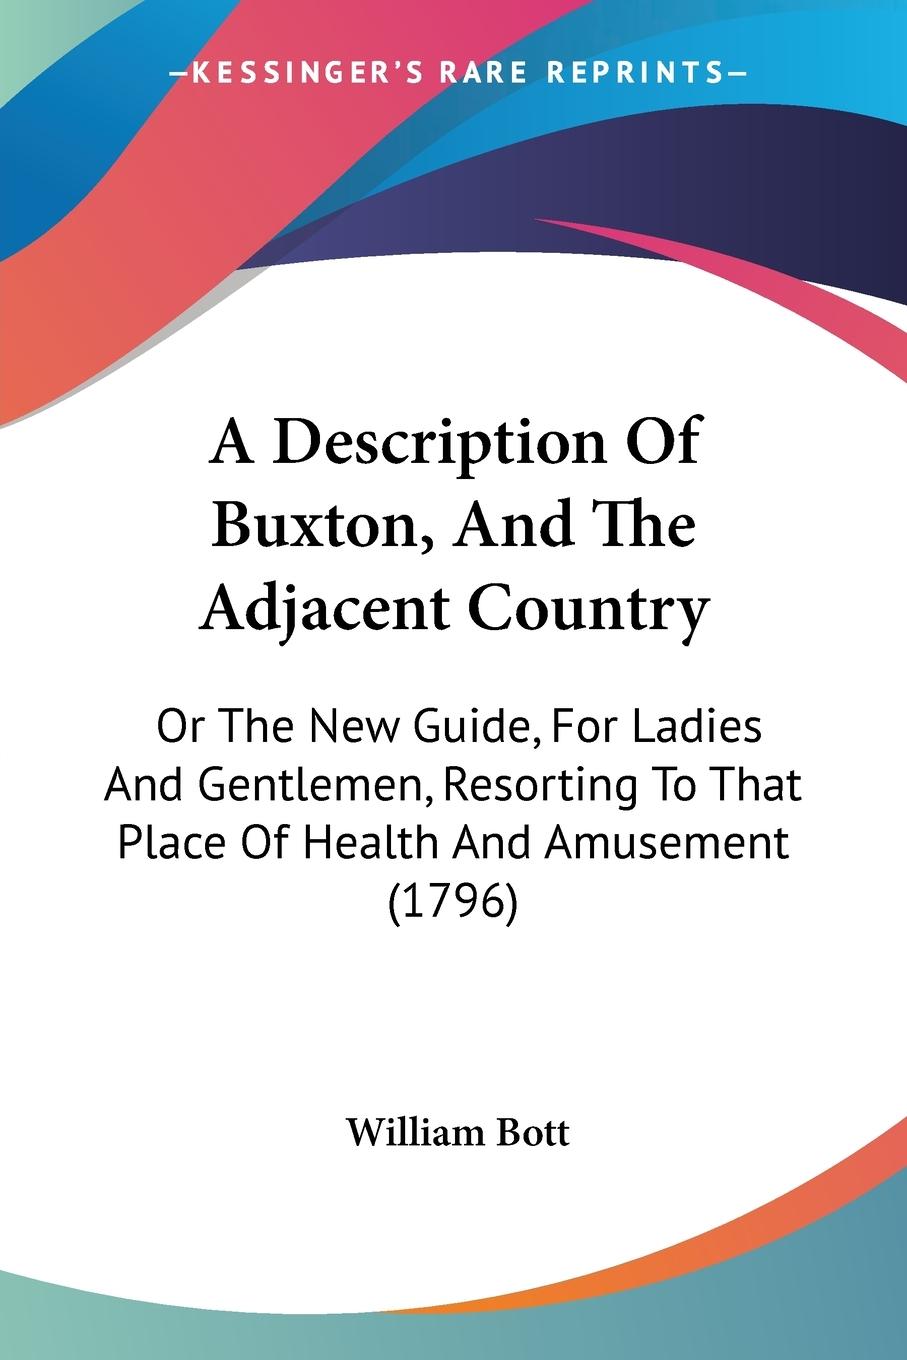 A Description Of Buxton, And The Adjacent Country